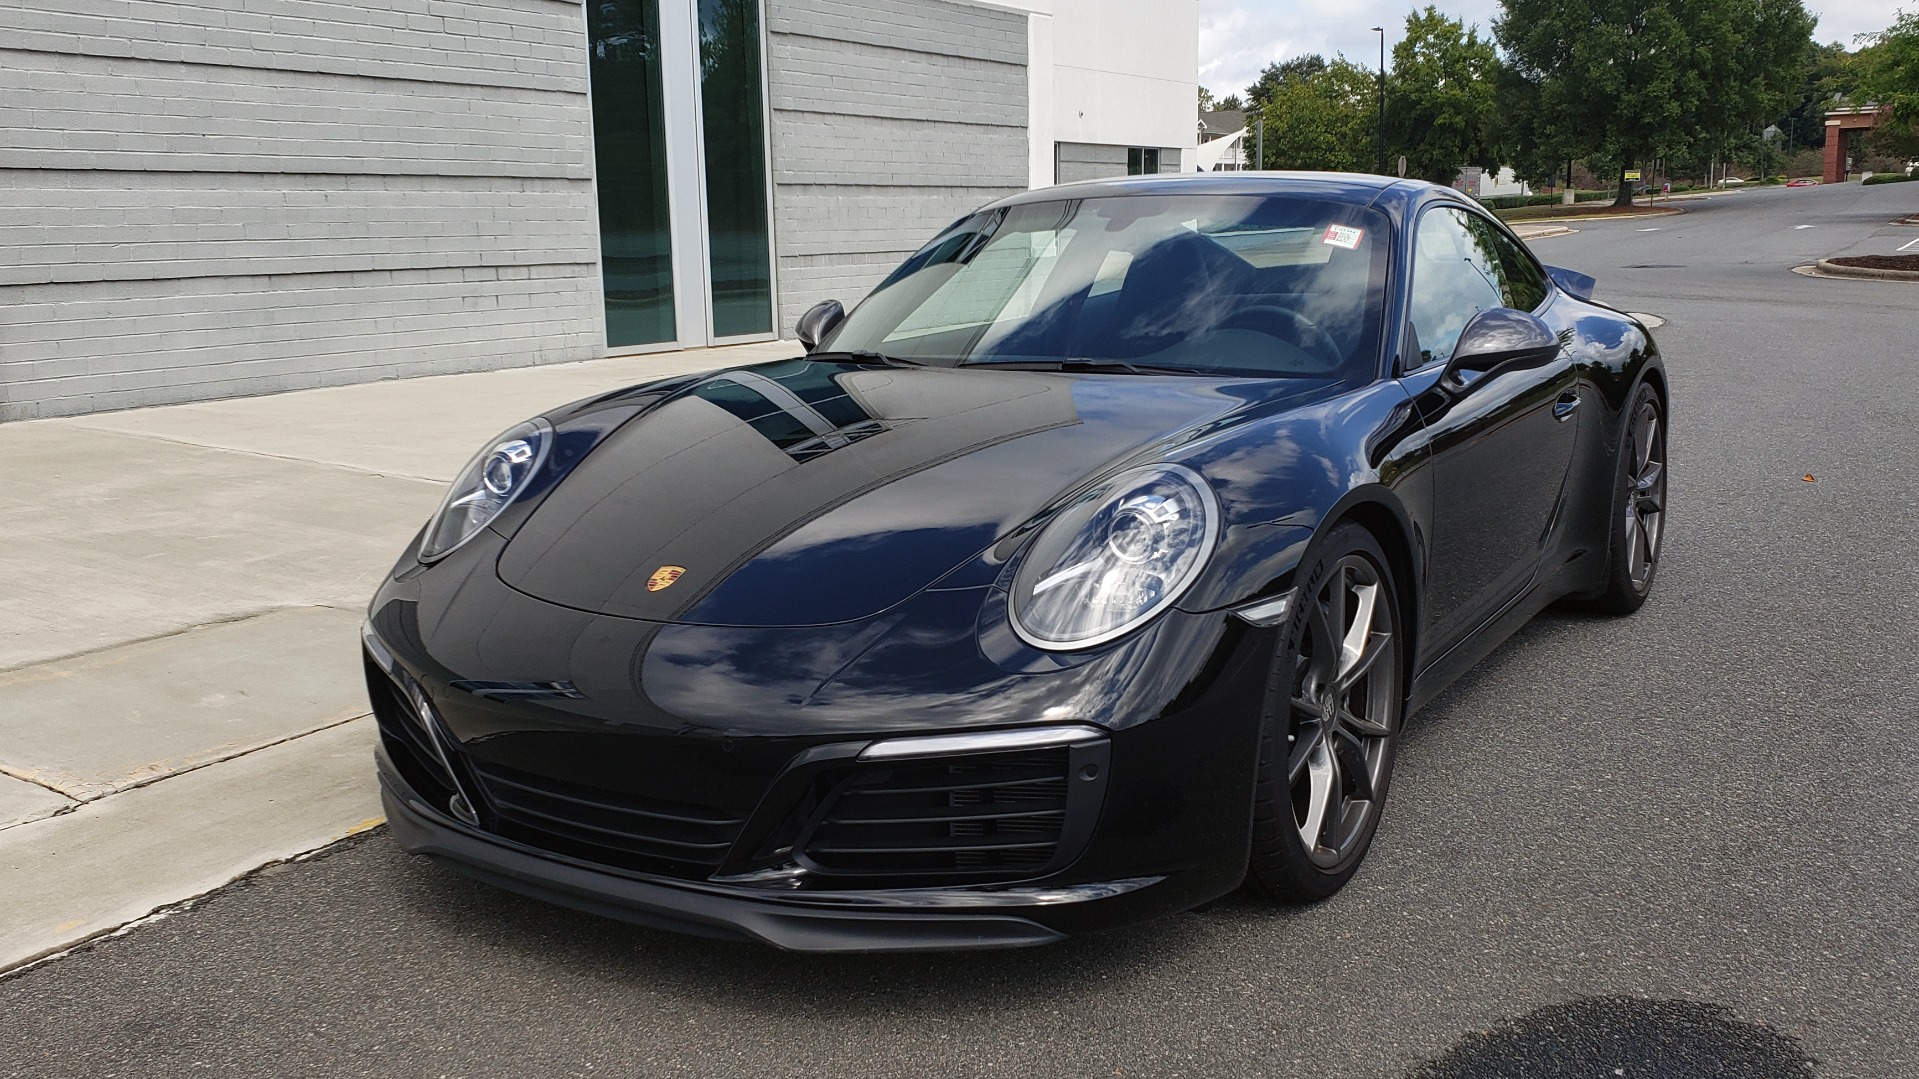 Used 2019 Porsche 911 CARRERA T / 3.0L H6 / MANUAL / PREMIUM / NAV / BOSE / SUNROOF / REARVIEW for sale Sold at Formula Imports in Charlotte NC 28227 4